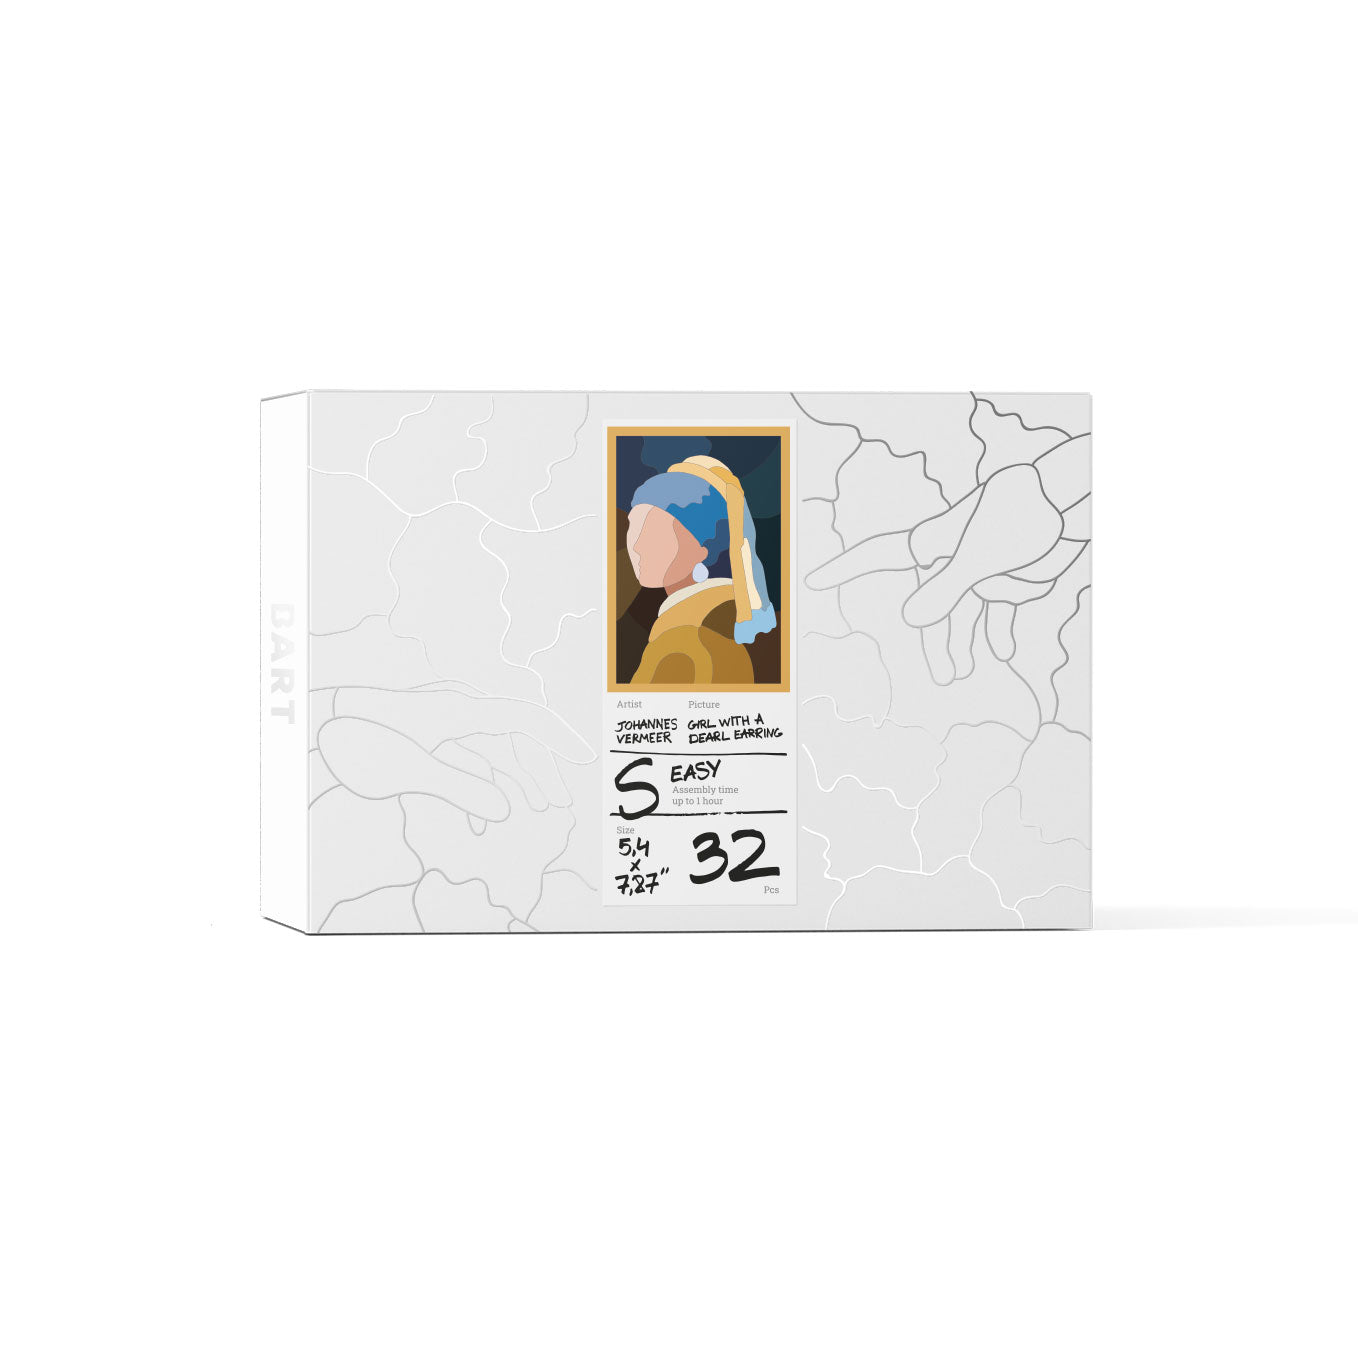 Wooden jigsaw puzzle Johannes Vermeer Girl with a Pearl Earring